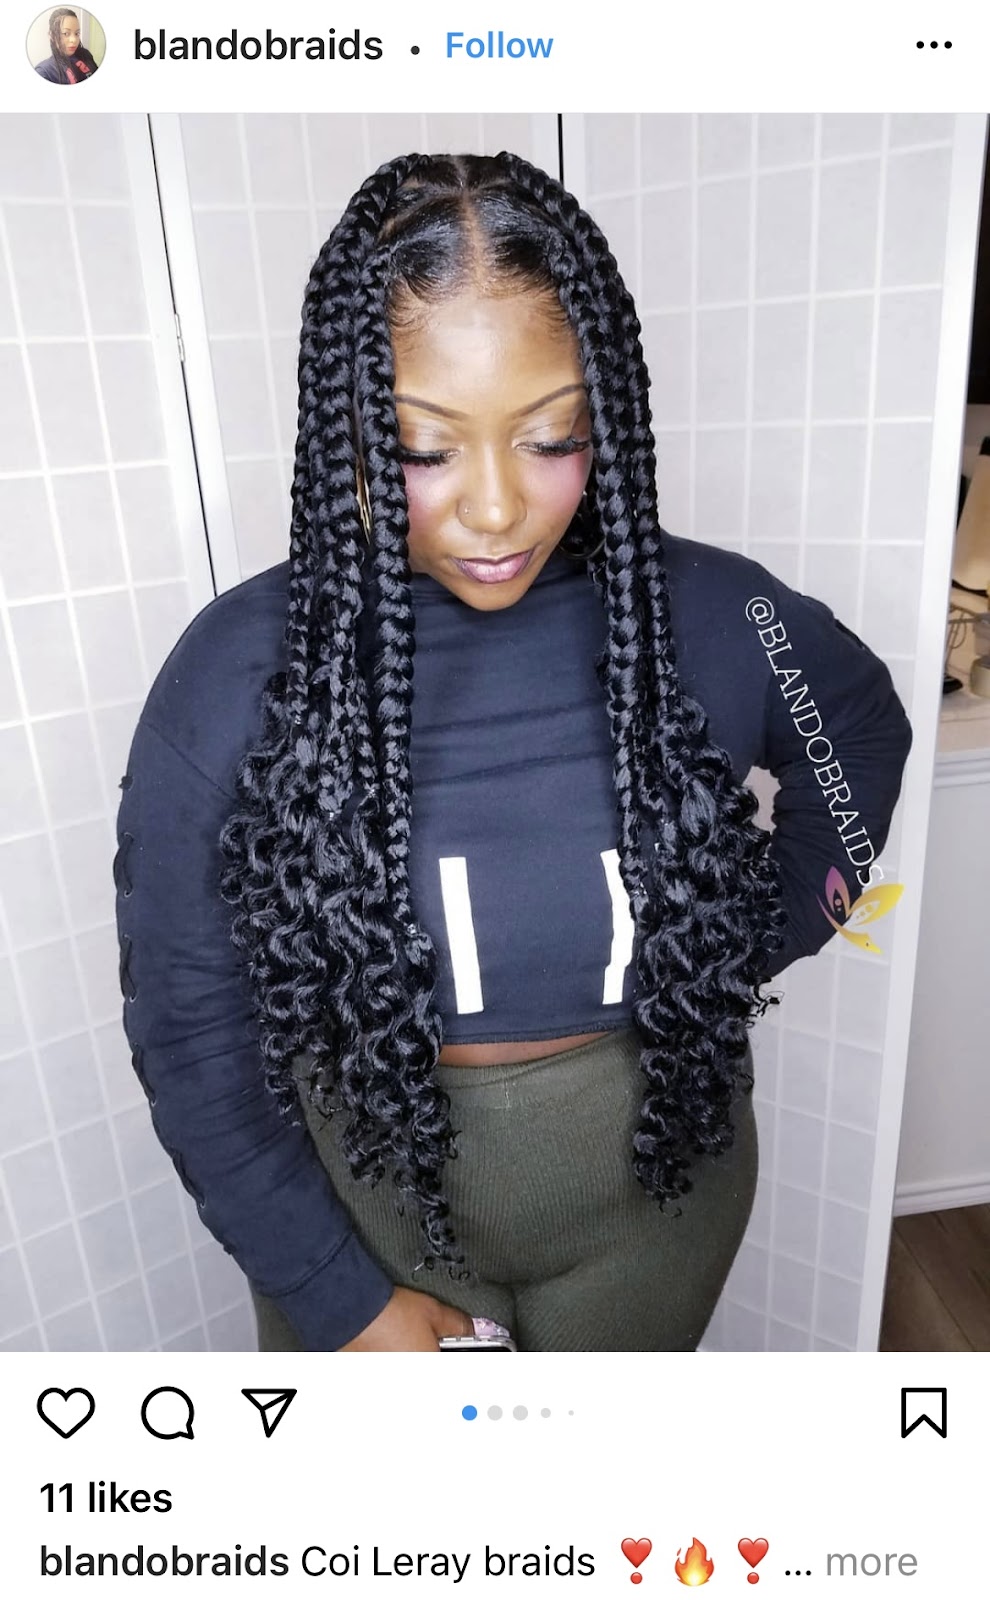 How To Do The Coi Leray Braids horror stories